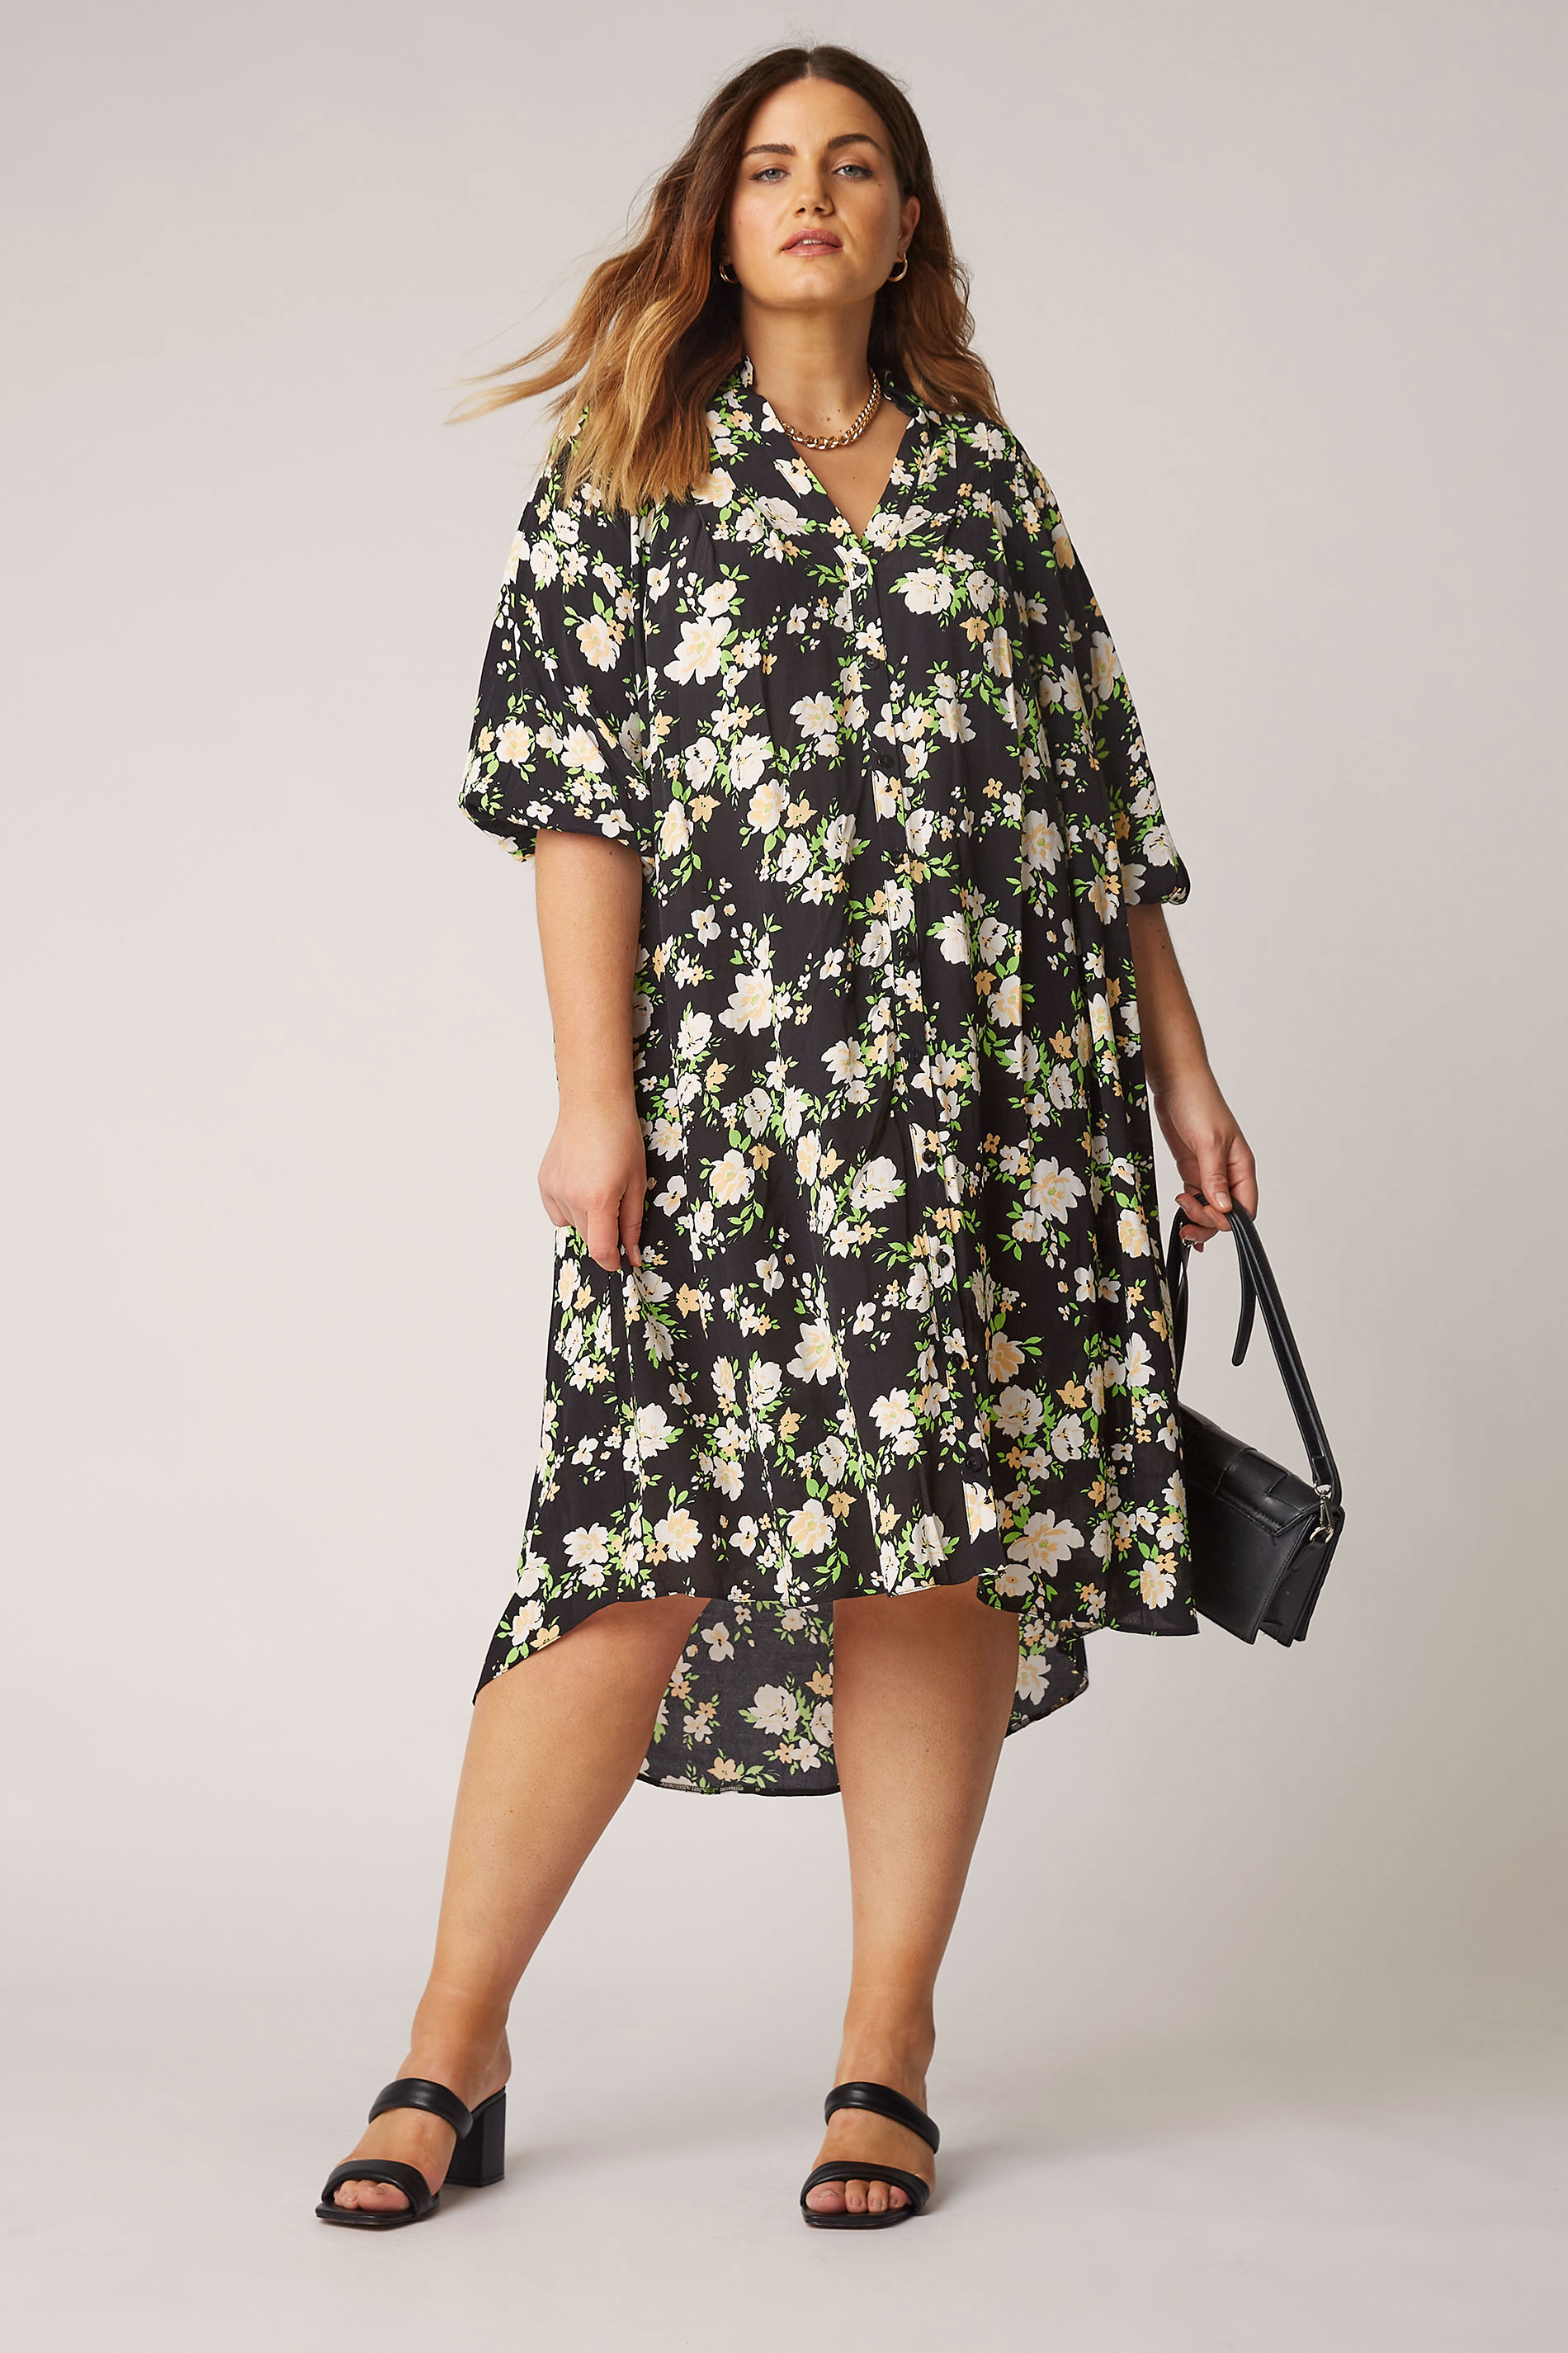 THE LIMITED EDIT Black Floral Pleated Dress